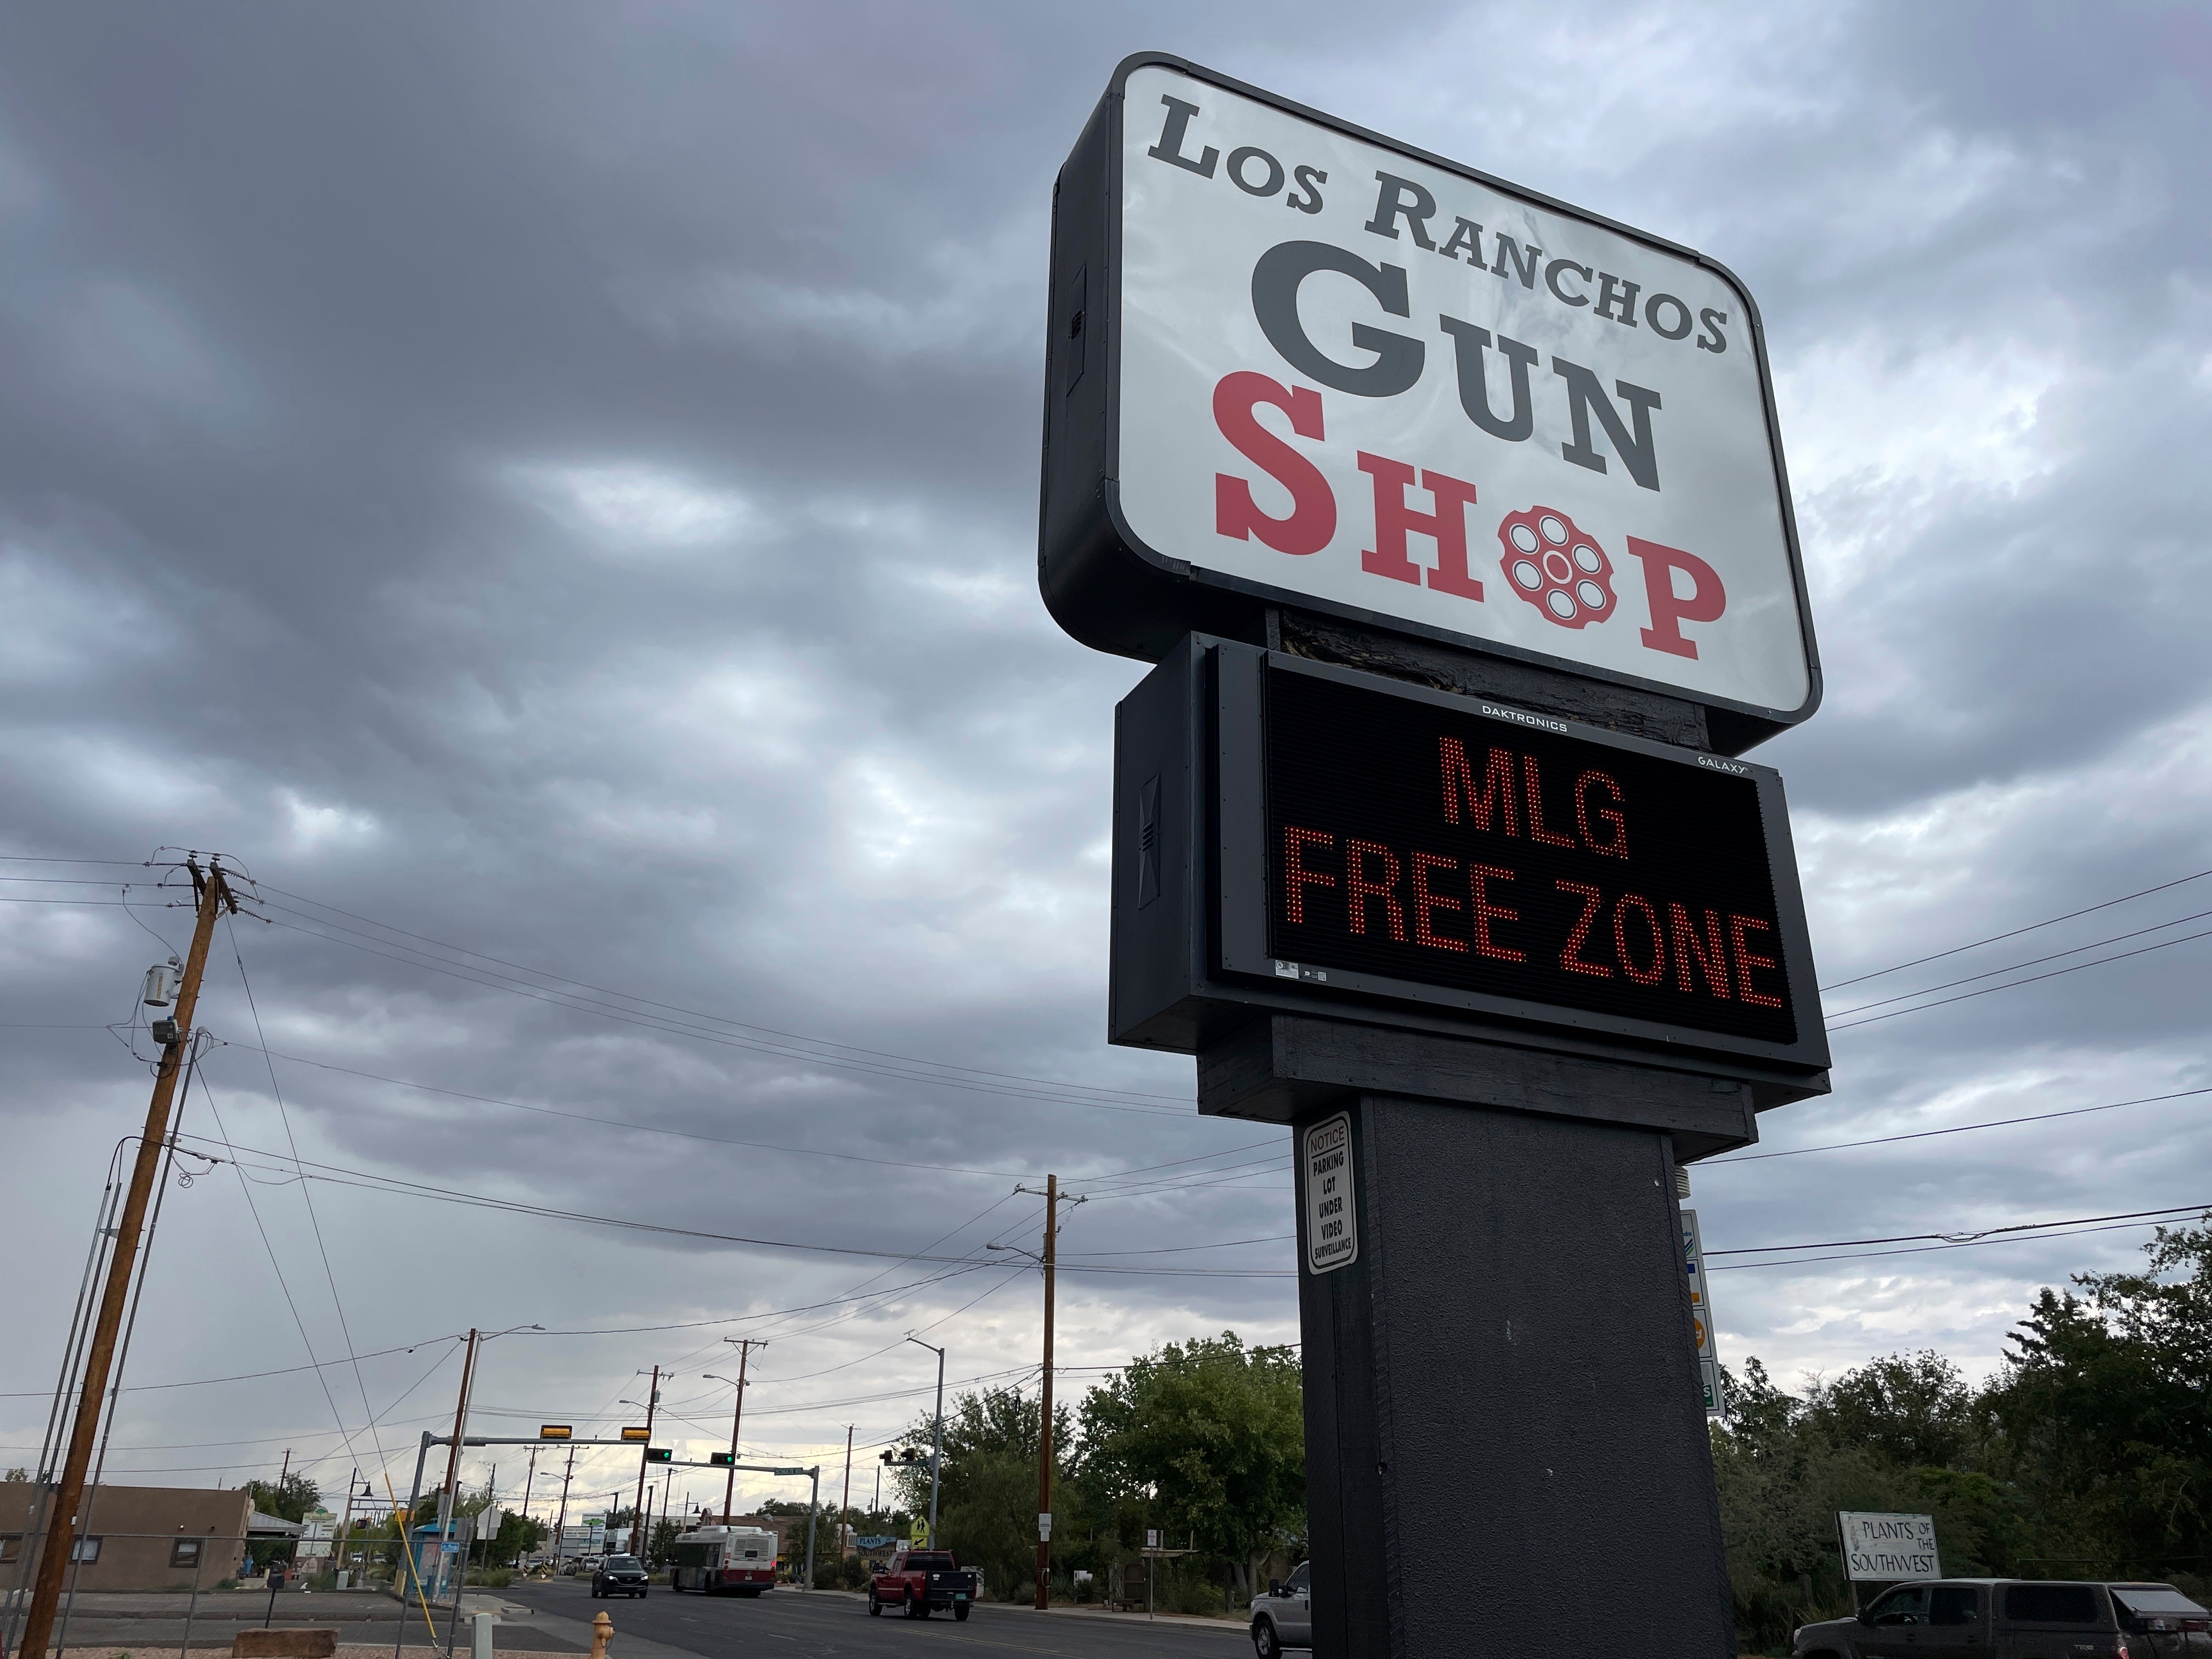 The marquee at a gun shop in Los Ranchos, New Mexico on 11 September protests Governor Michelle Lujan Grisham’s order banning residents from carrying firearms in public.